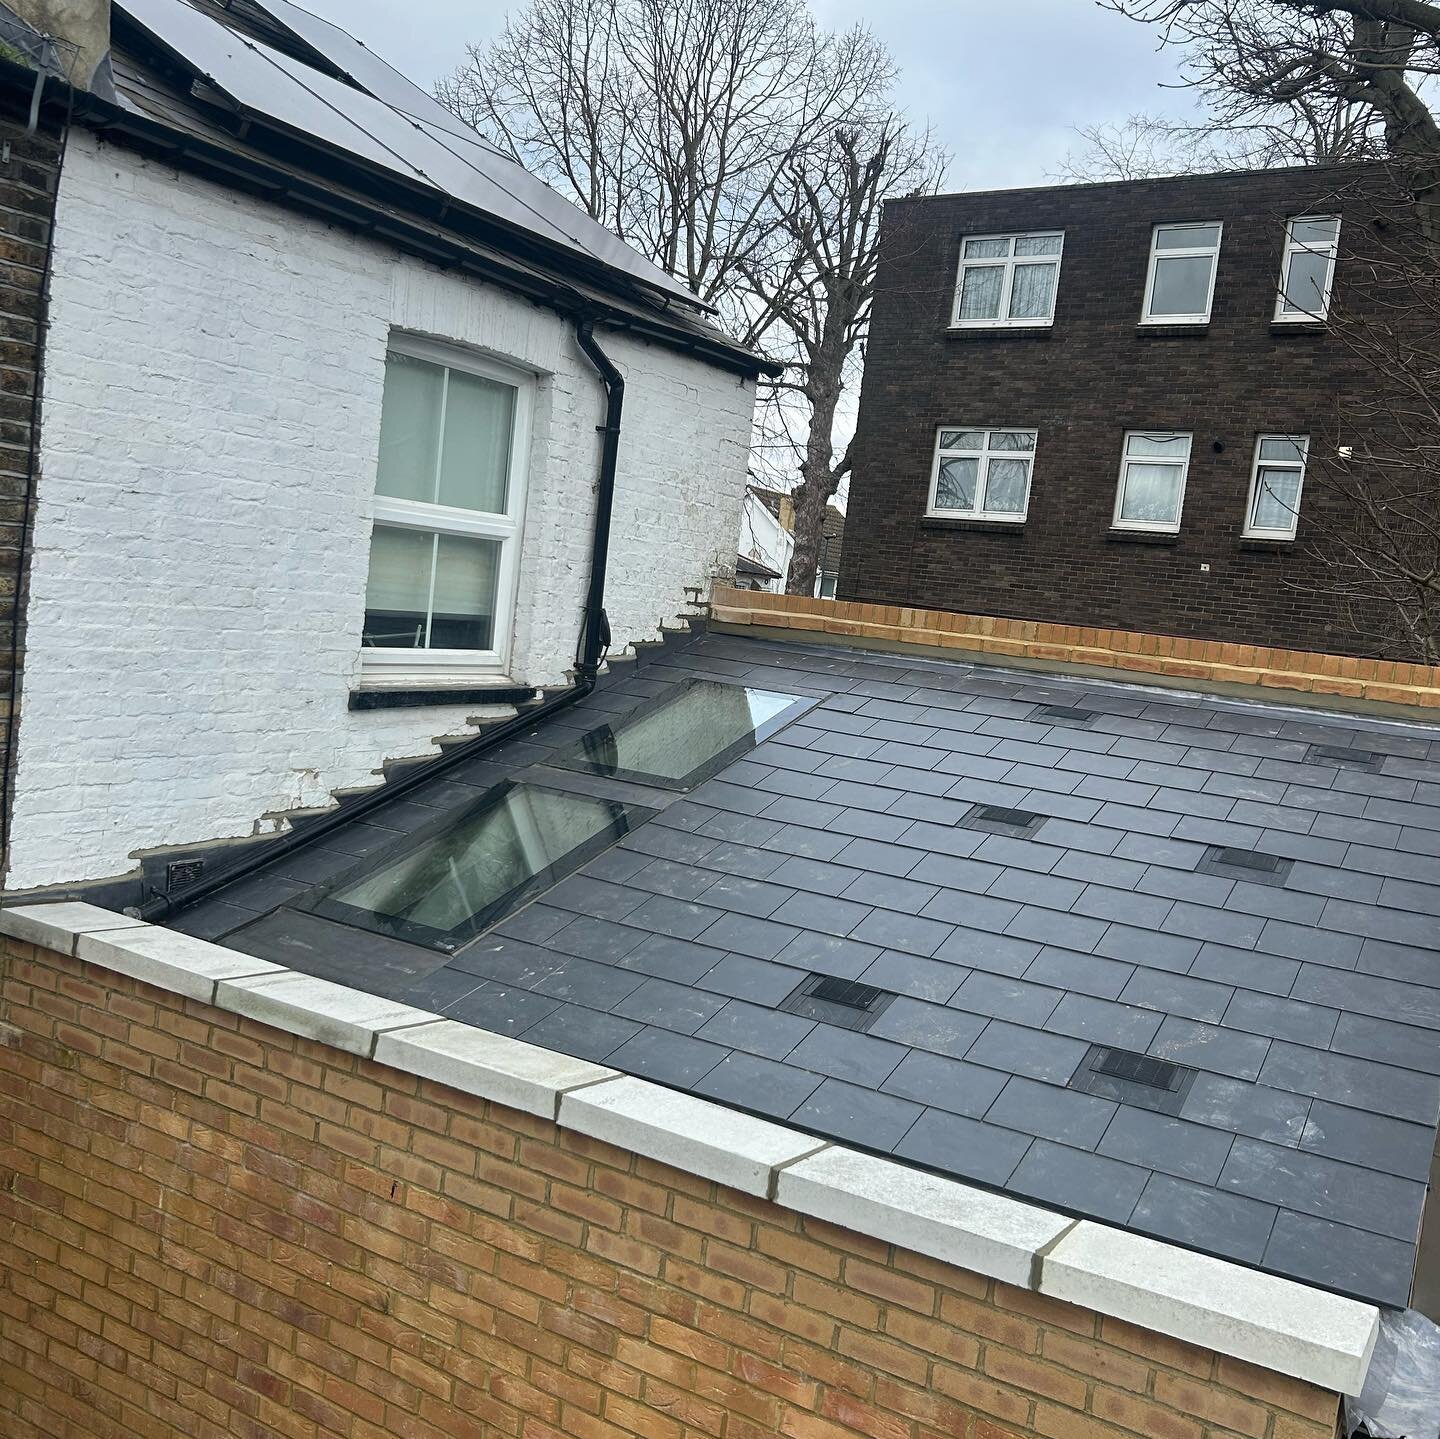 A new extension roof we have just completed in Shooter&rsquo;s Hill SE18 with new Marley eternit slates new code 5 lead box&rsquo;s gutter and all new code 4 lead flashings to parapet walls with new coping stones to parapet wall visit www.sapsford.co